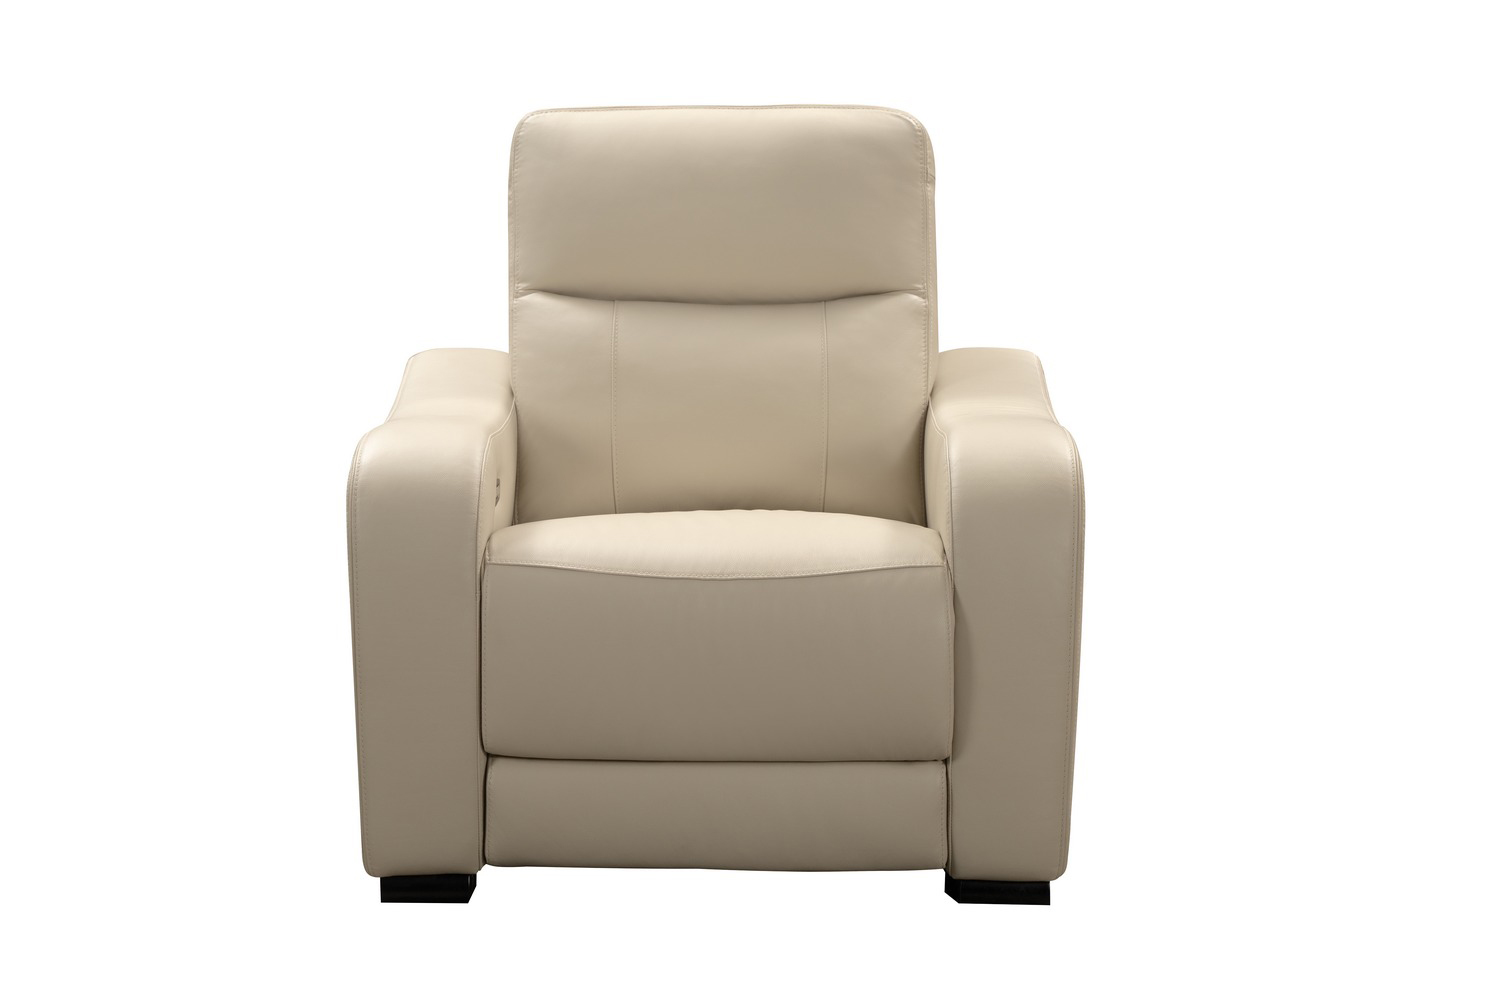 Barcalounger Electra Power Recliner Chair with Power Head Rest and Power Lumbar - Laurel Cream/Leather Match